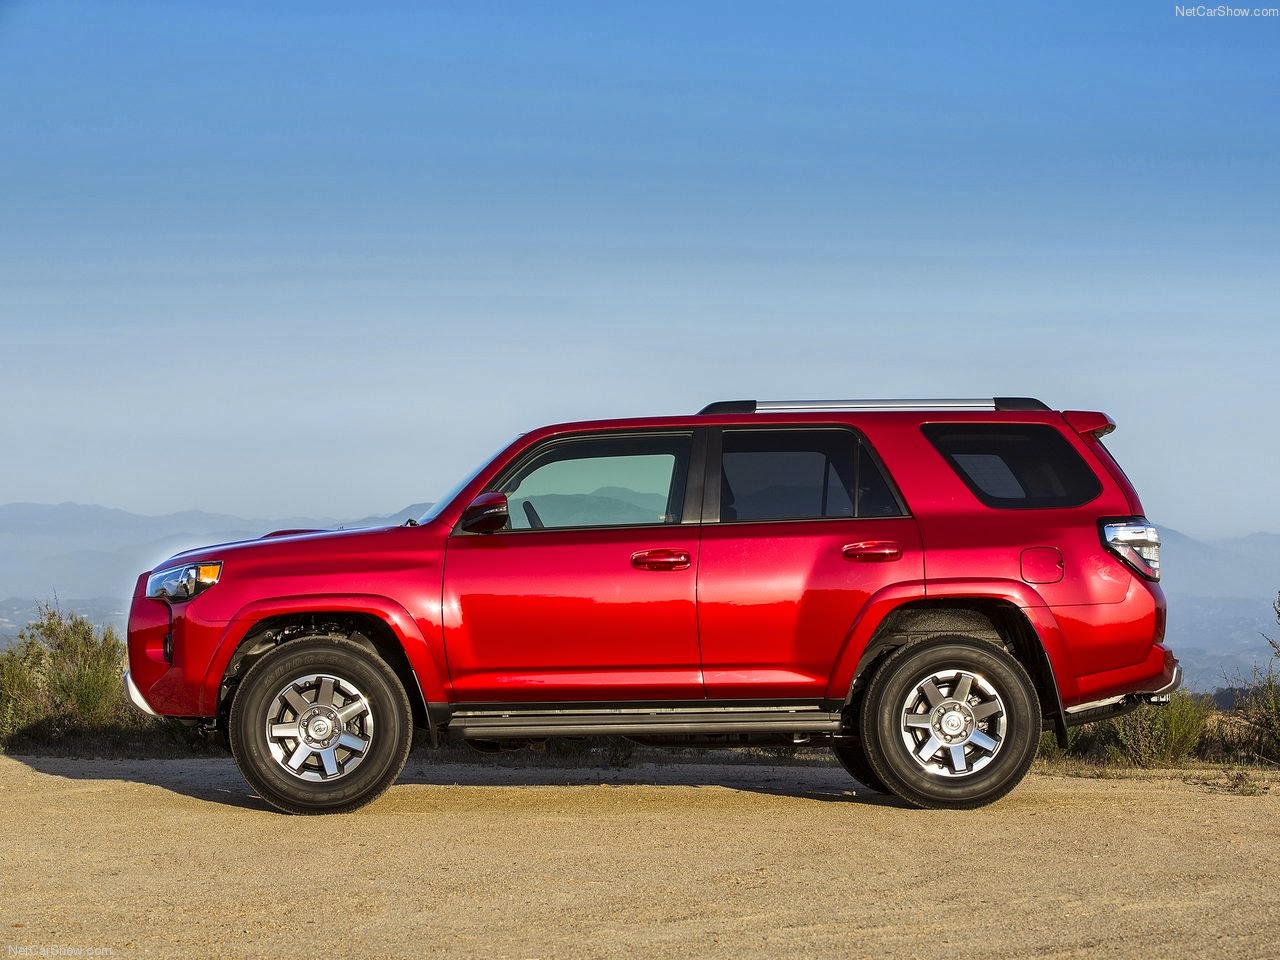 Best of Auto Car: Toyota 4Runner SUV cool cars in 2014